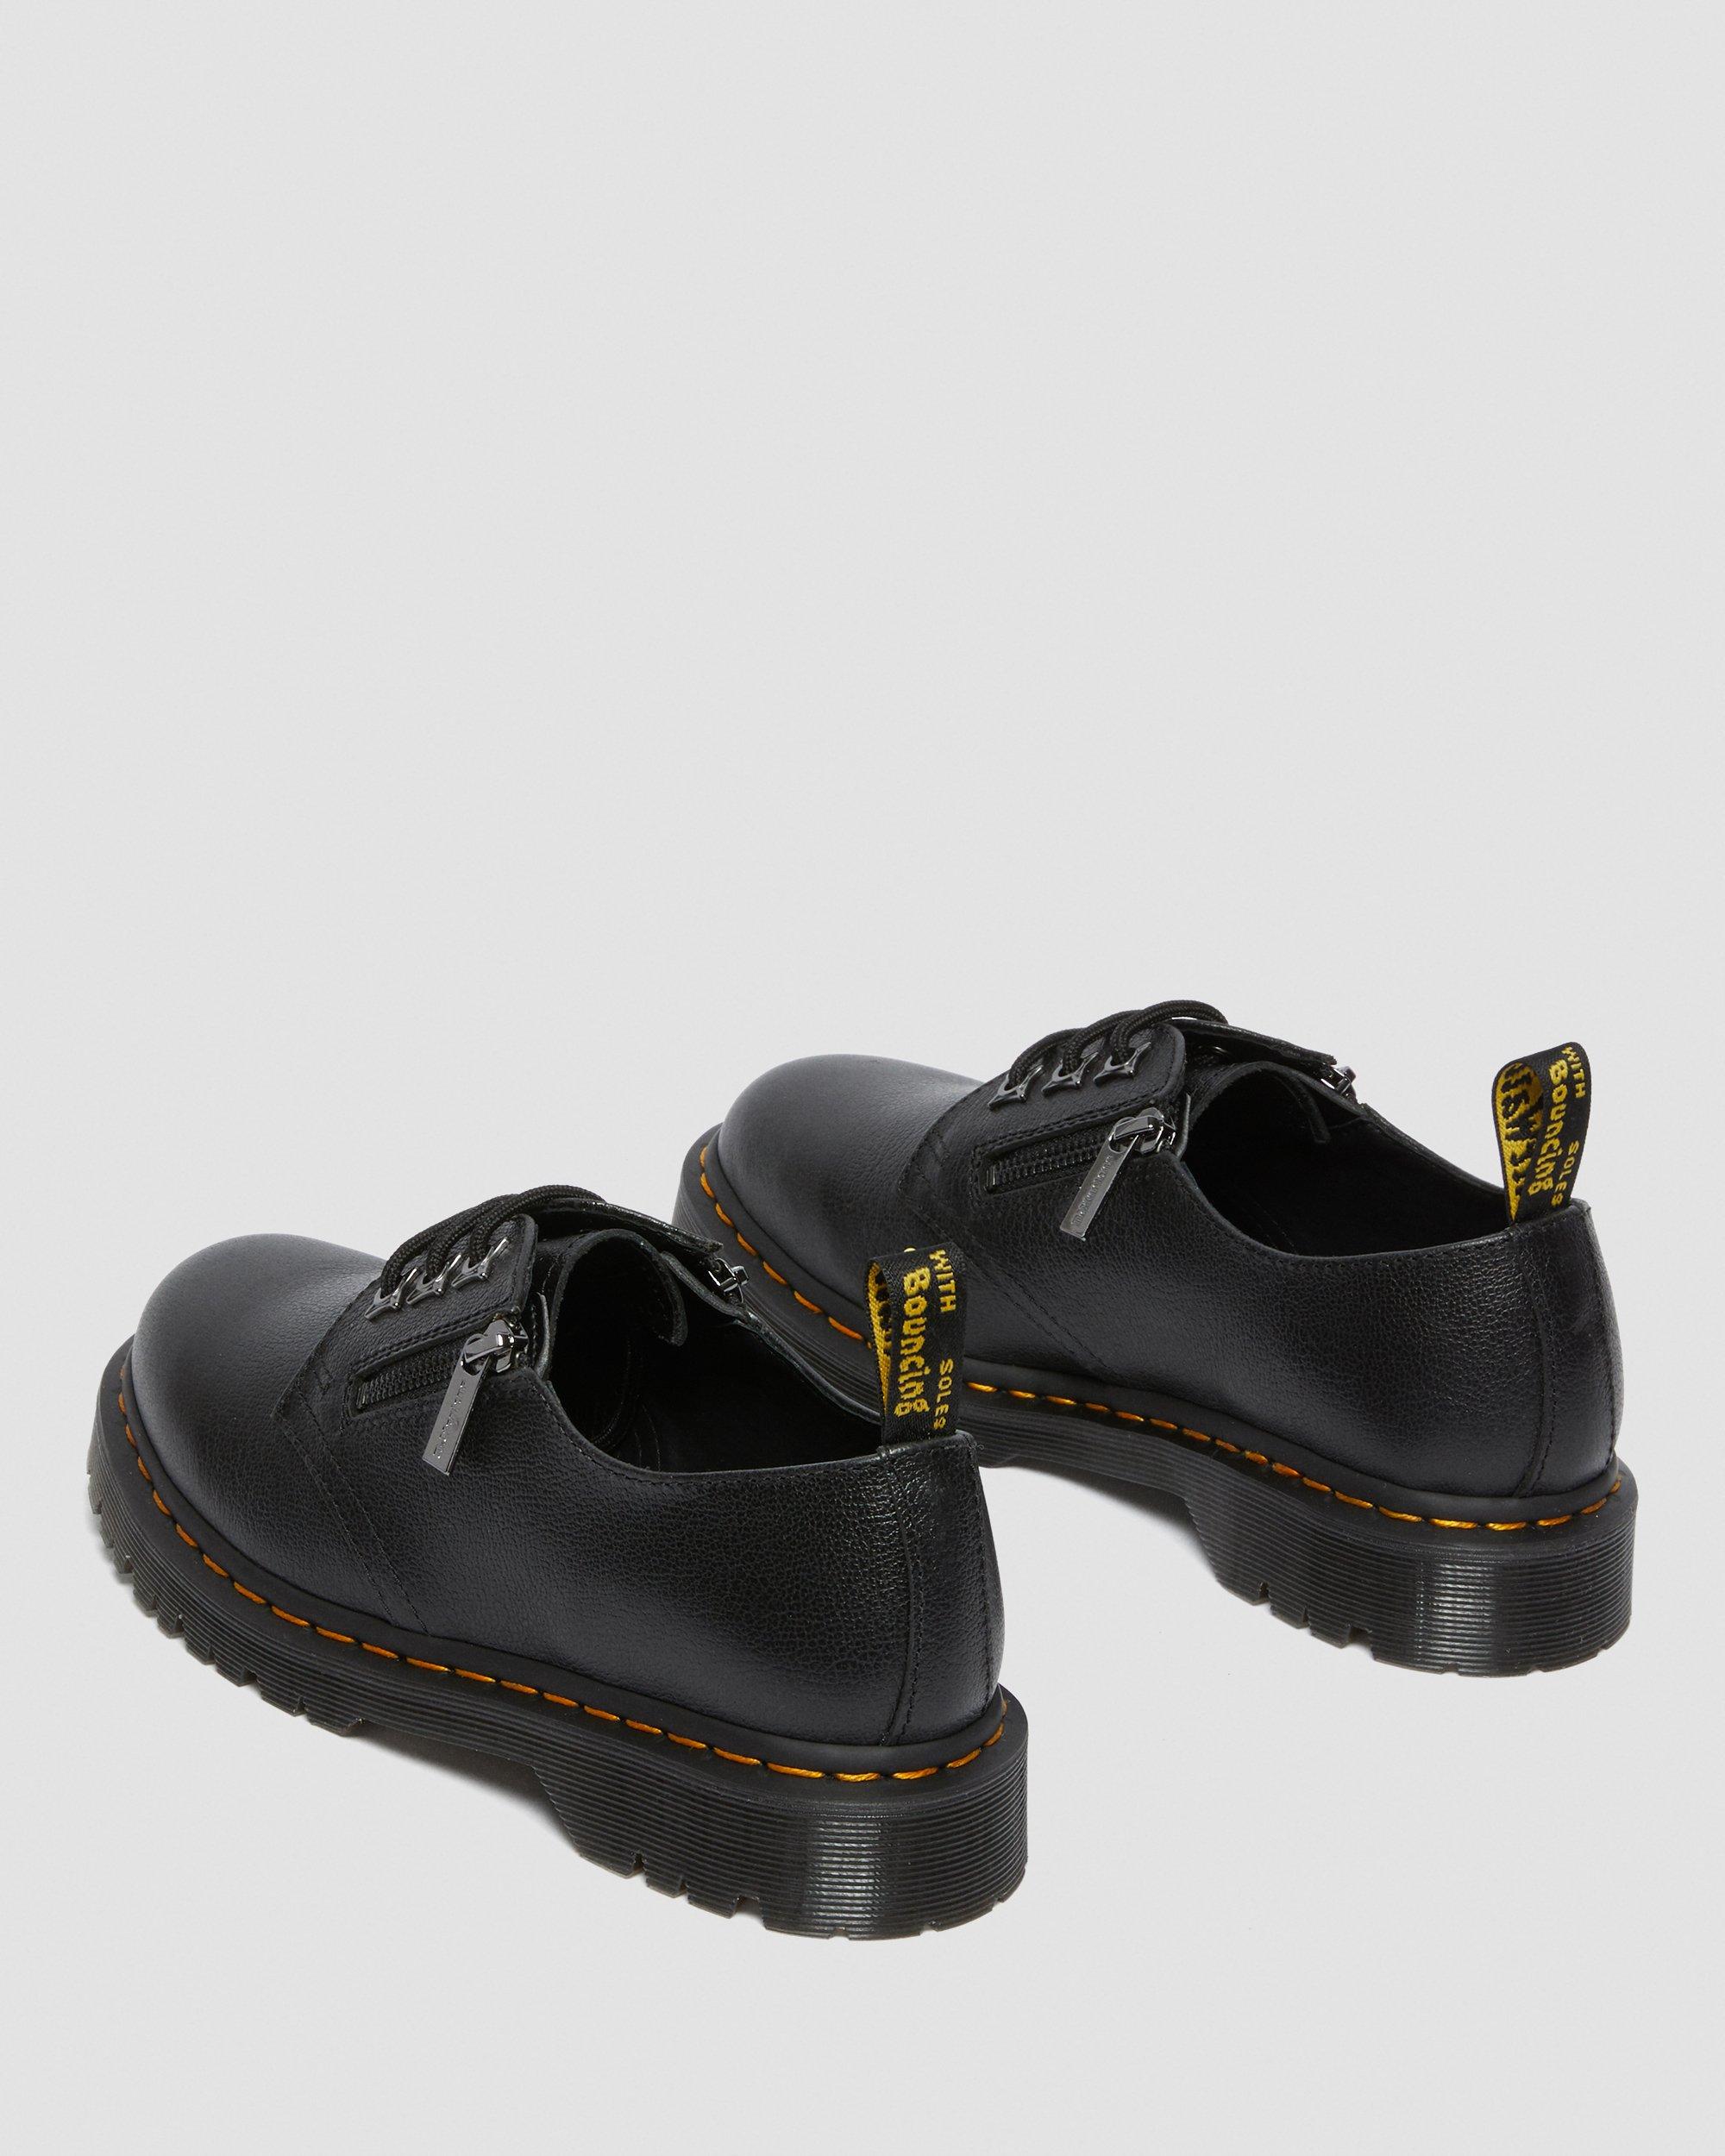 1461 Zip Tumbled Leather Oxford Shoes in Black | Dr. Martens